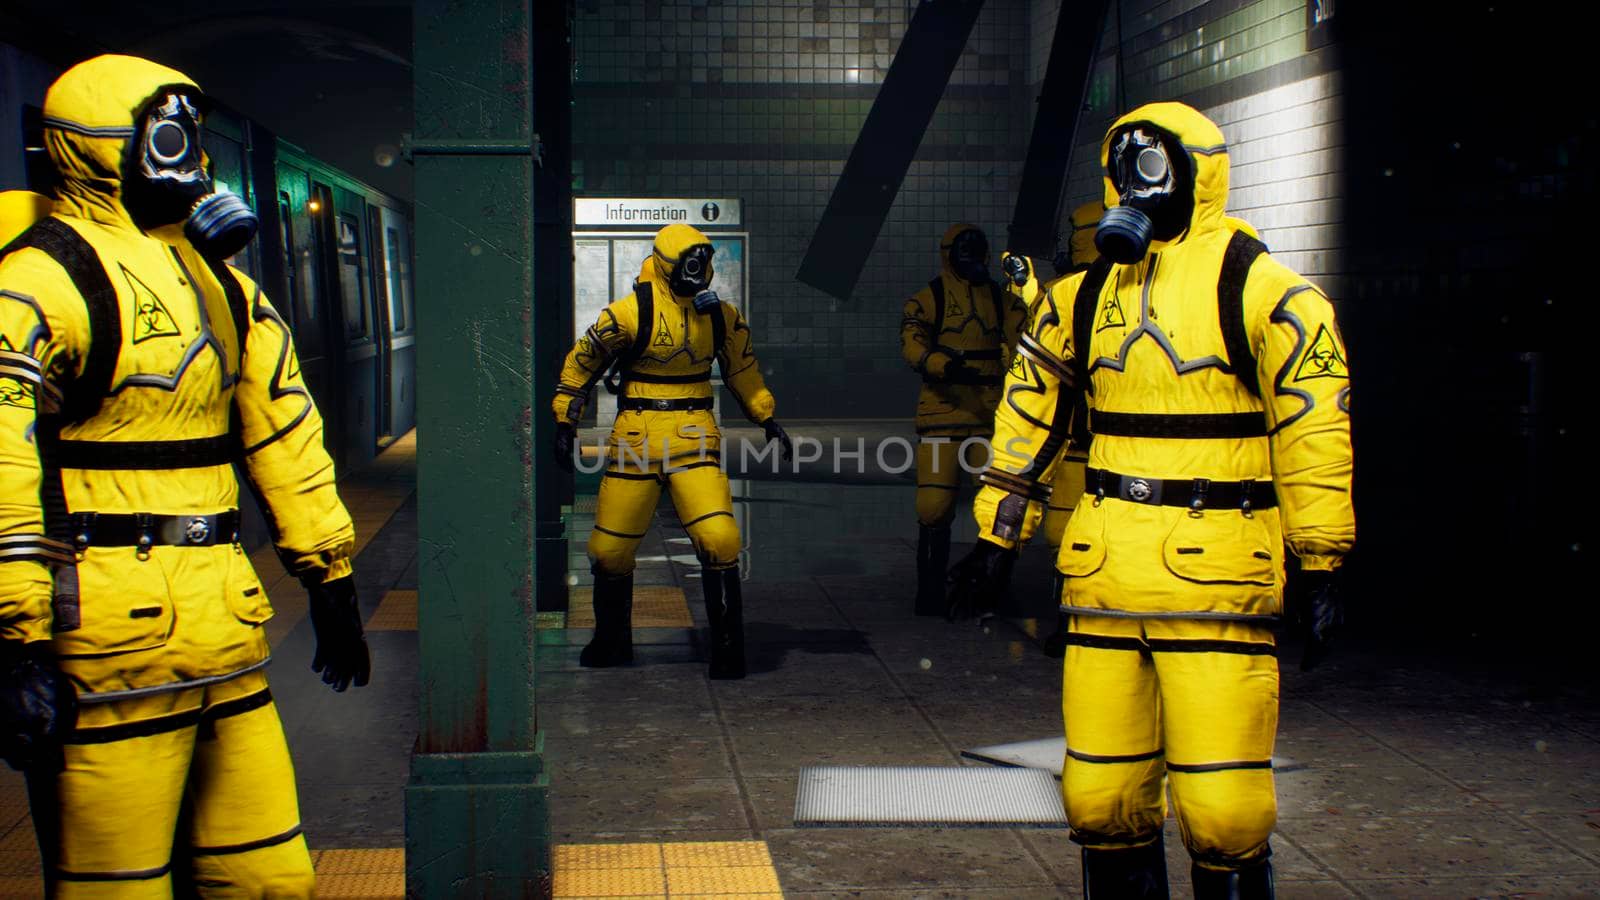 Doctors in protective chemical clothing are waiting for the train to go to fight the pandemic. The concept of a post-apocalyptic world after a global pandemic.